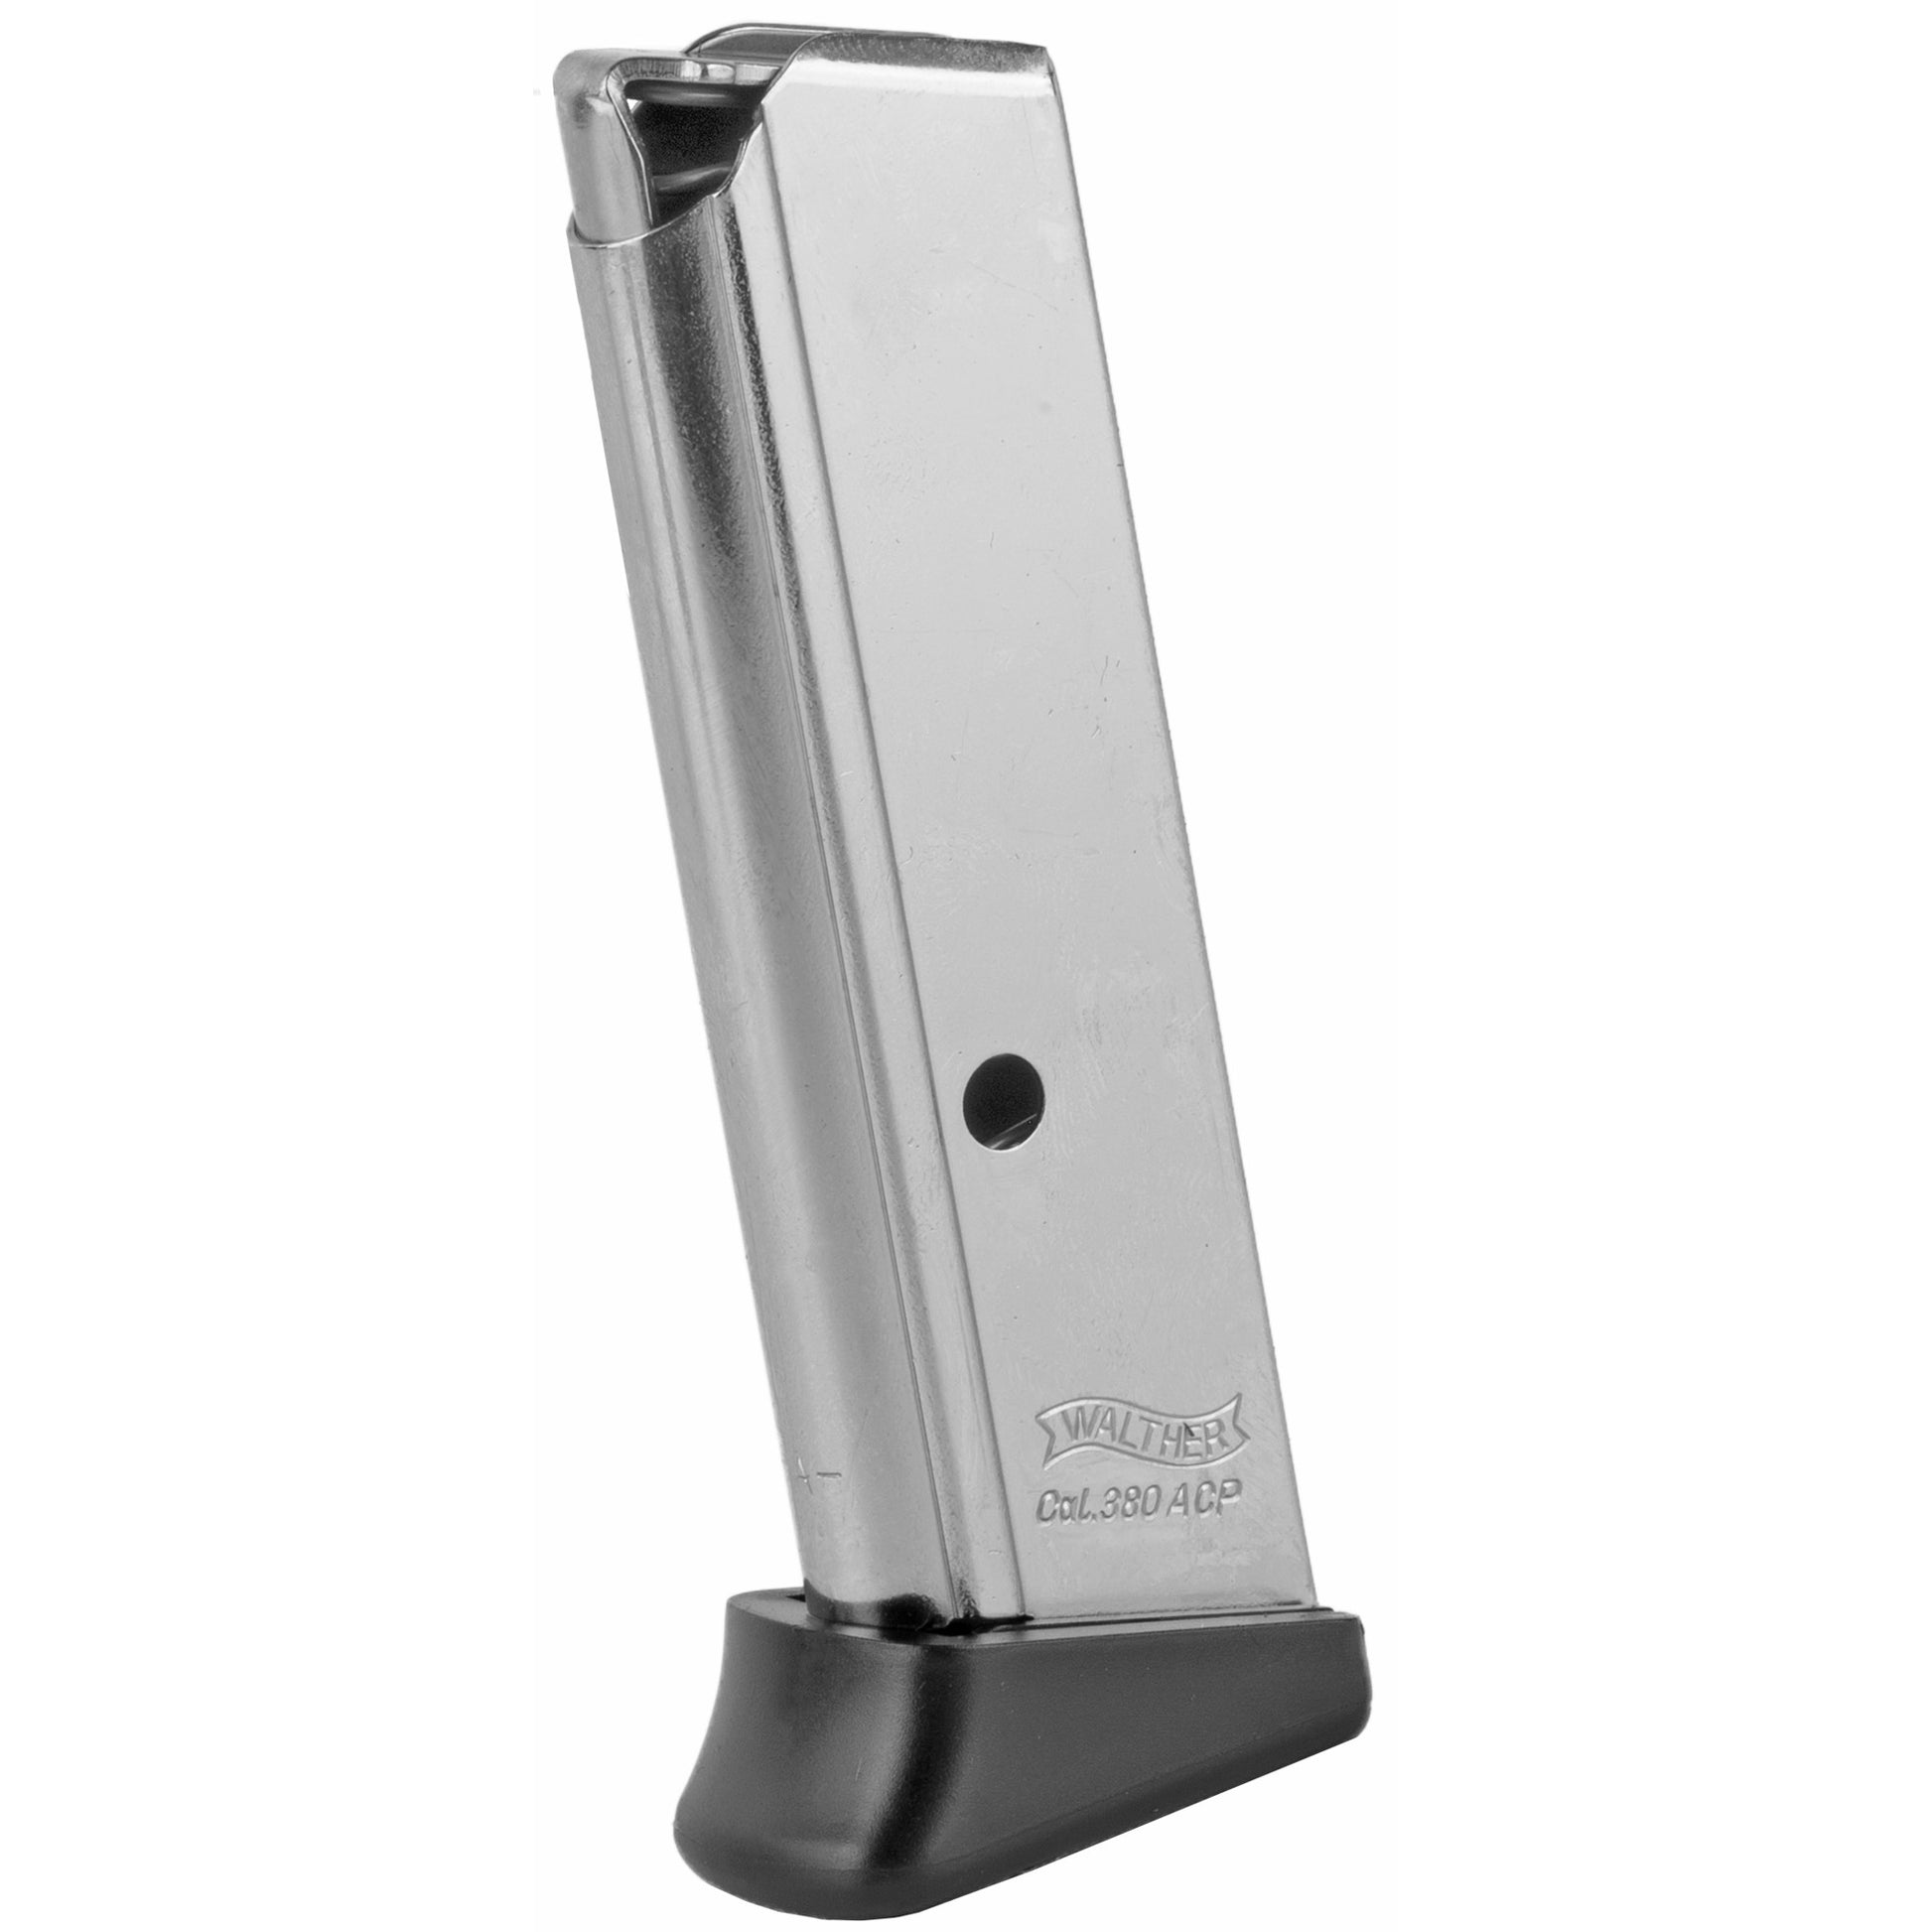 Walther Magazine 380ACP 6 Rounds Fits PPK w Finger Rest Nickel Finish 2246010 - California Shooting Supplies